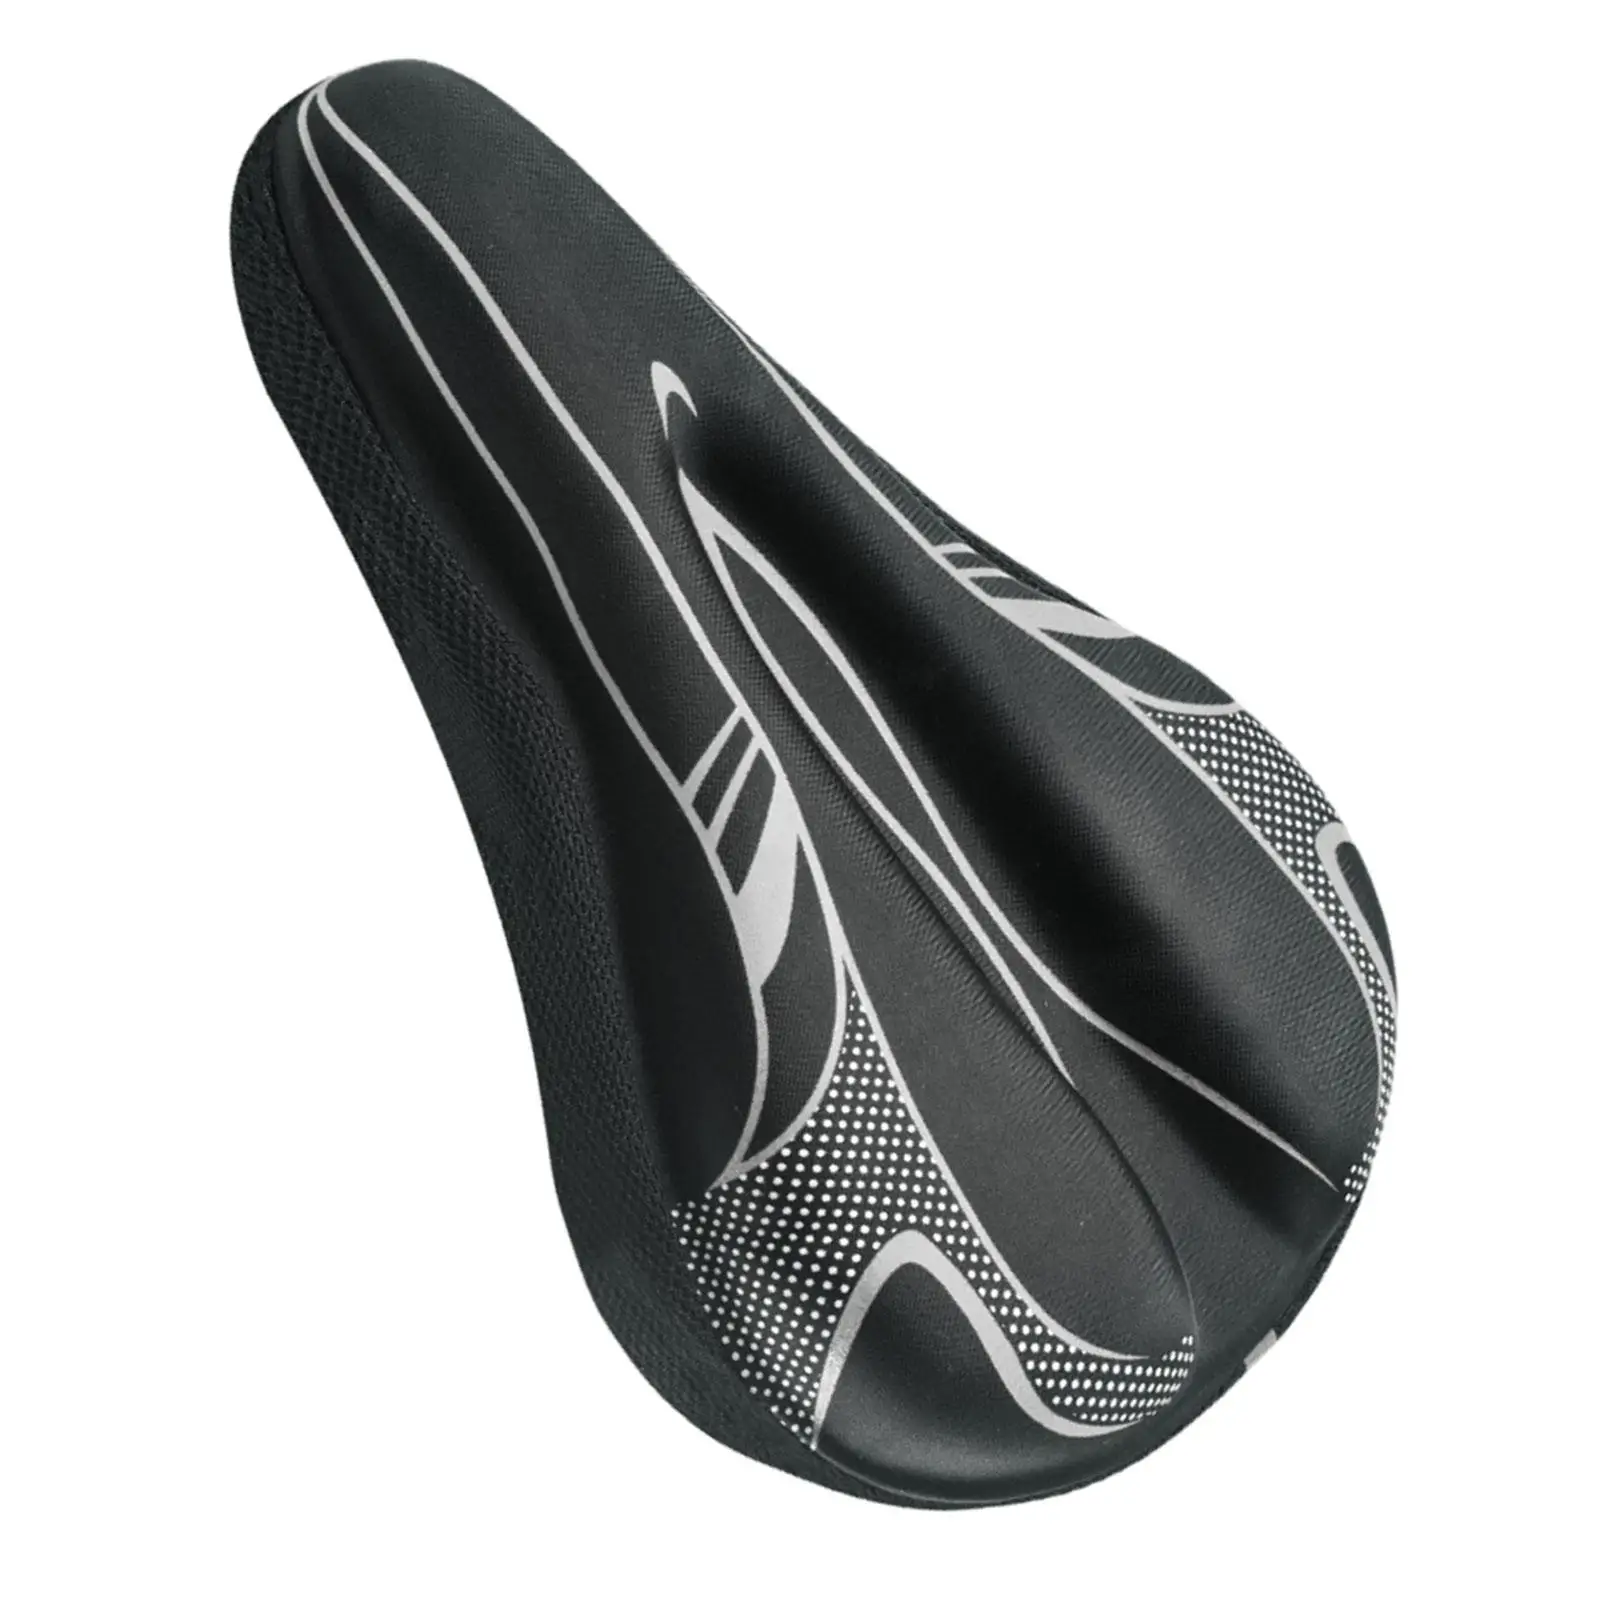 Bike Saddle Cover Men Women Seat Easy to Install Cushion Comfortable Wear Resistant with Drawstring MTB Bicycle Seat Cushion